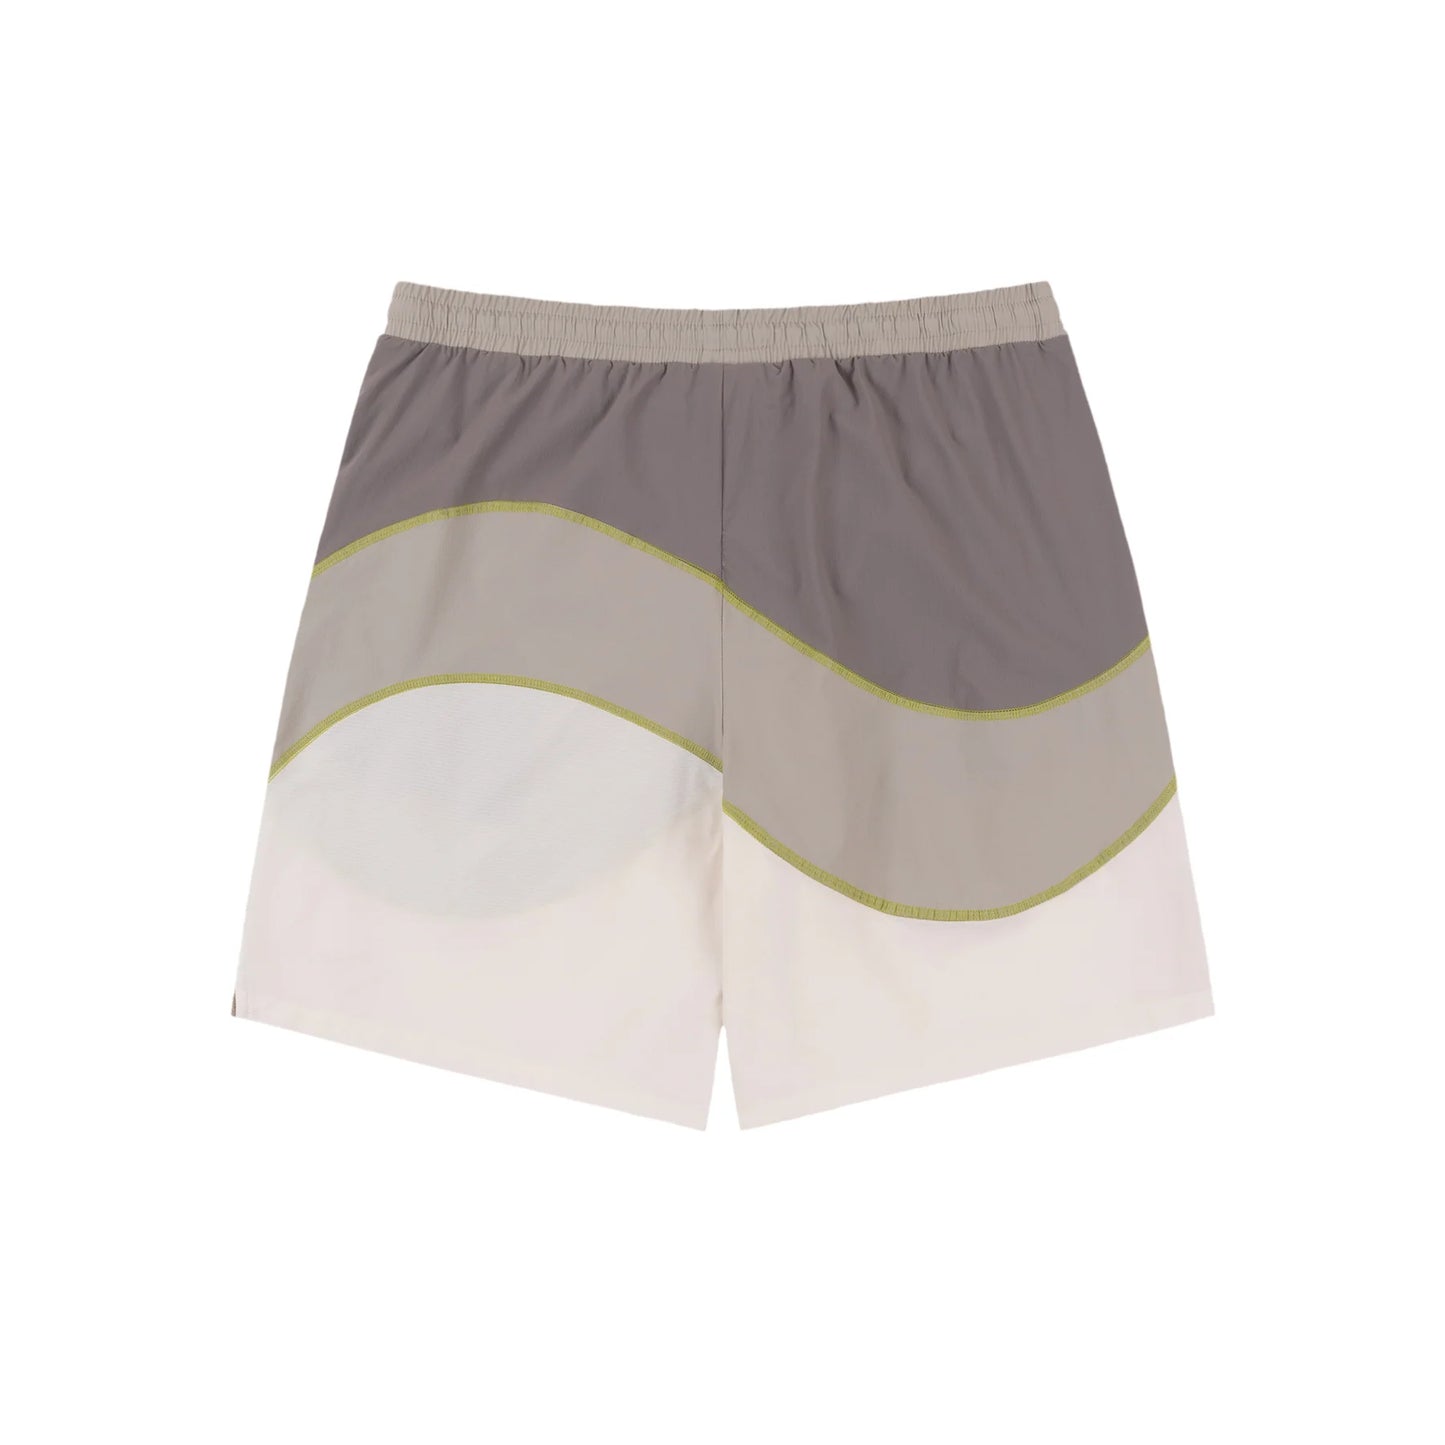 Dime Wave Sport Shorts Gry(size options listed)